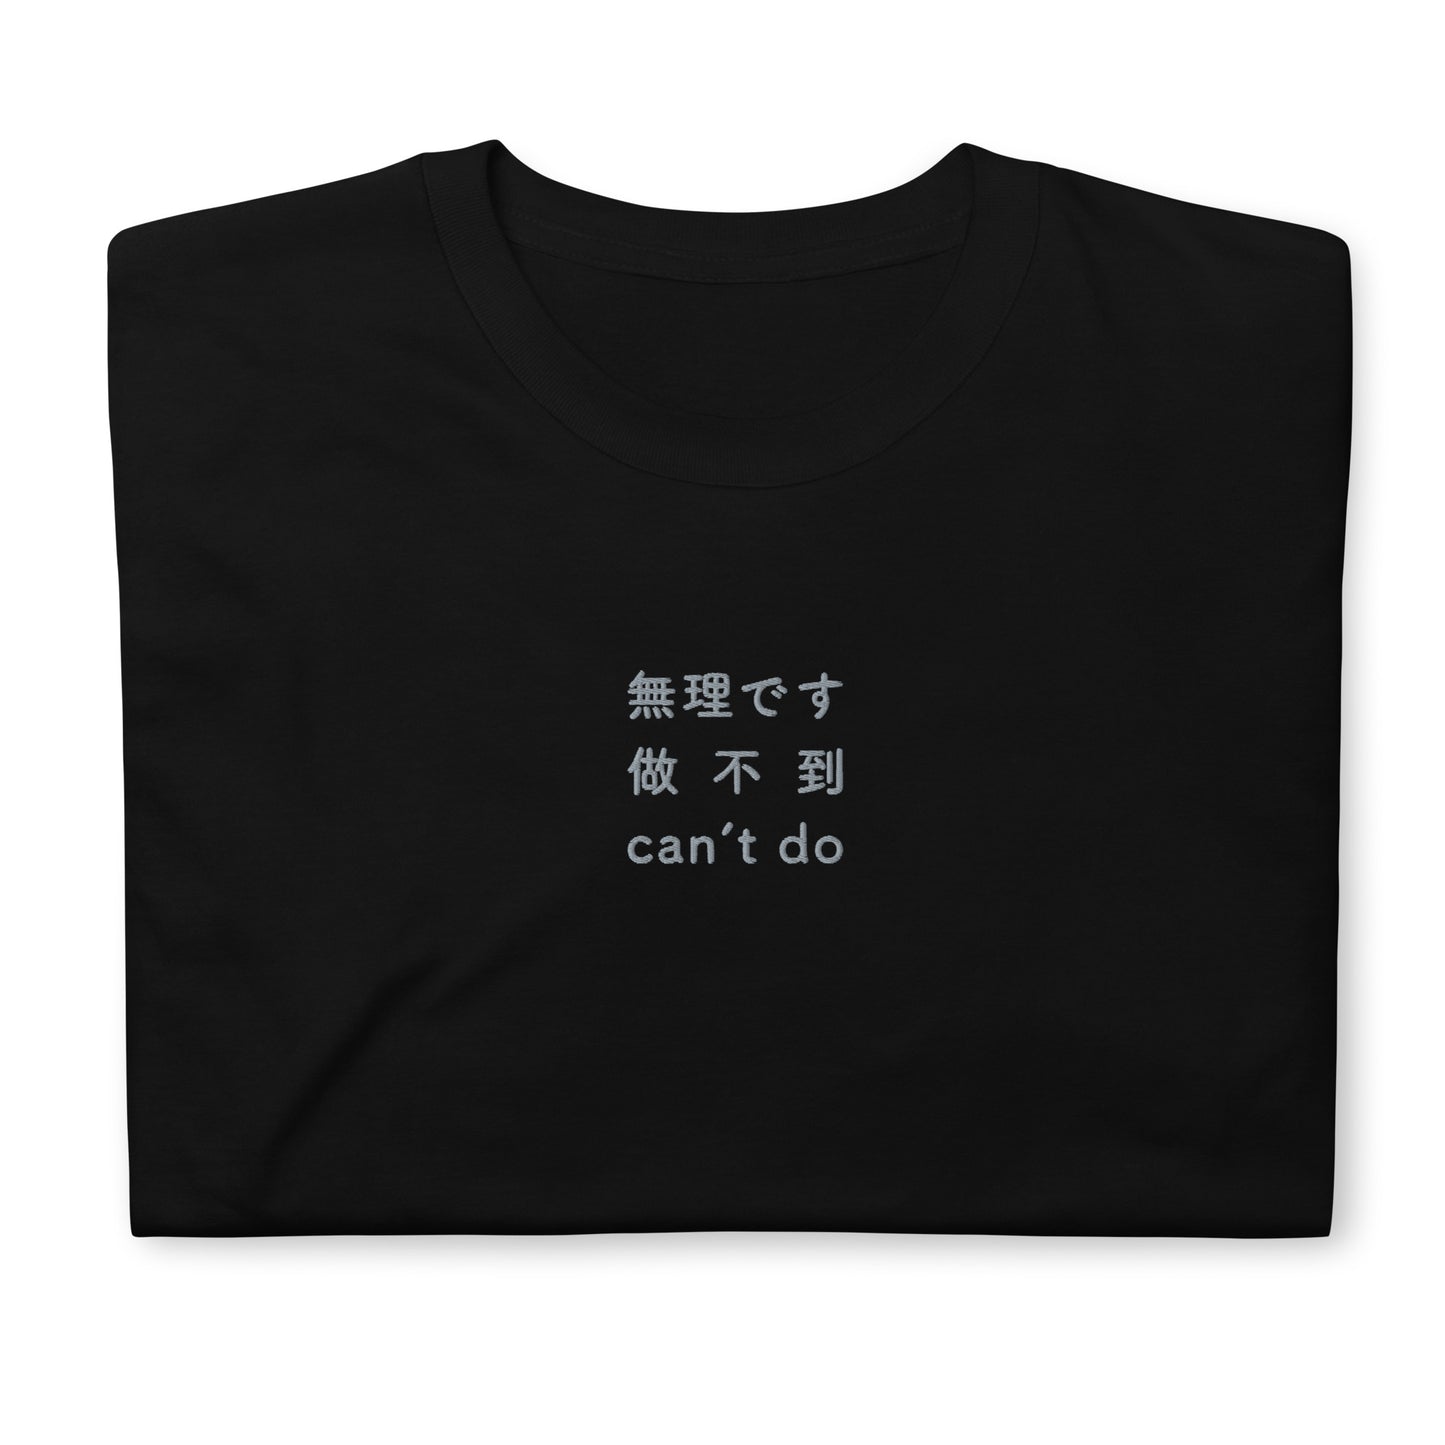 Black High Quality Tee - Front Design with an Light Gray Embroidery "Can't Do" in Japanese, Chinese and English